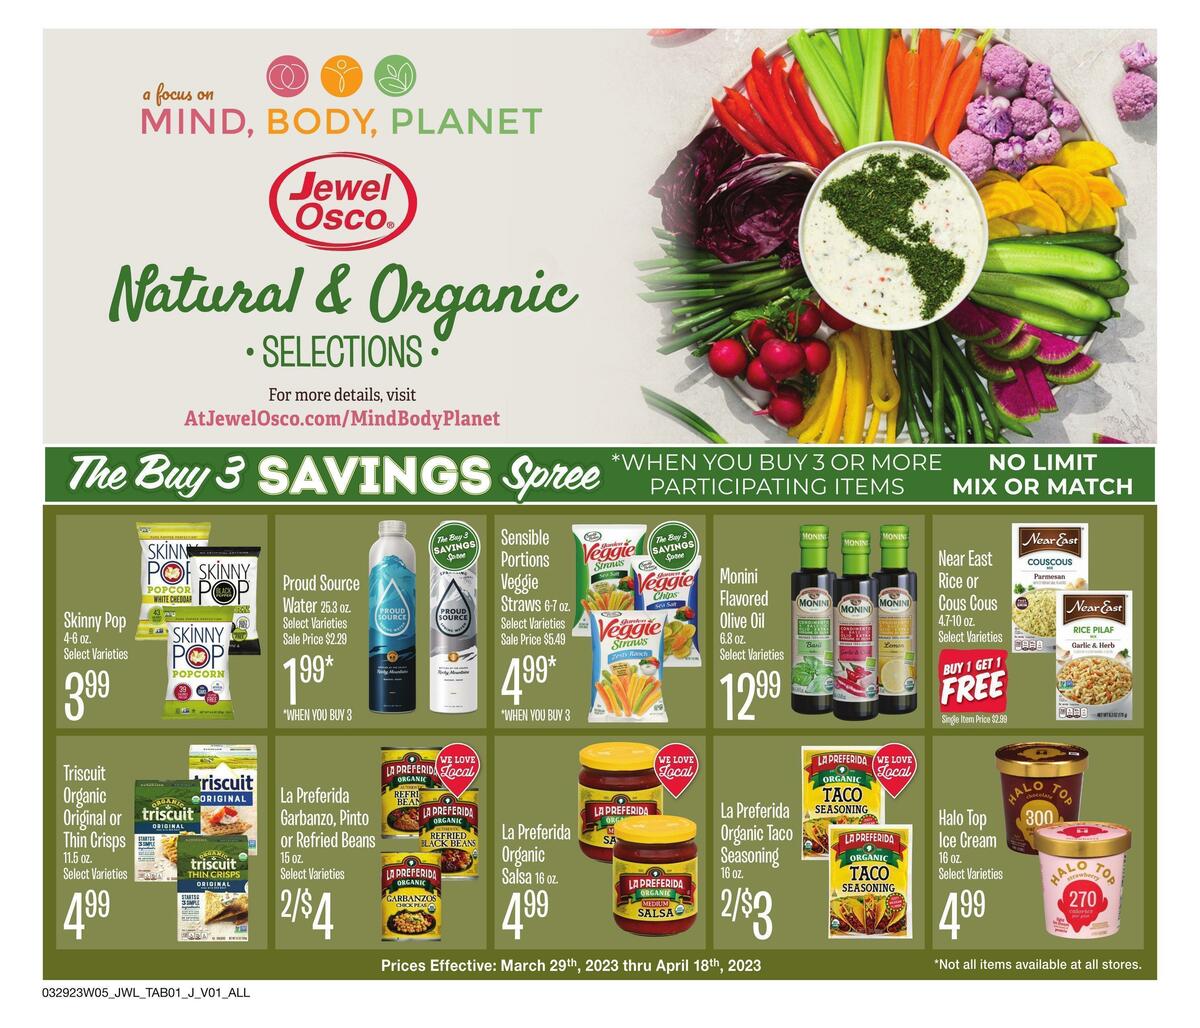 Jewel Osco Natural & Organic Weekly Ad from March 29